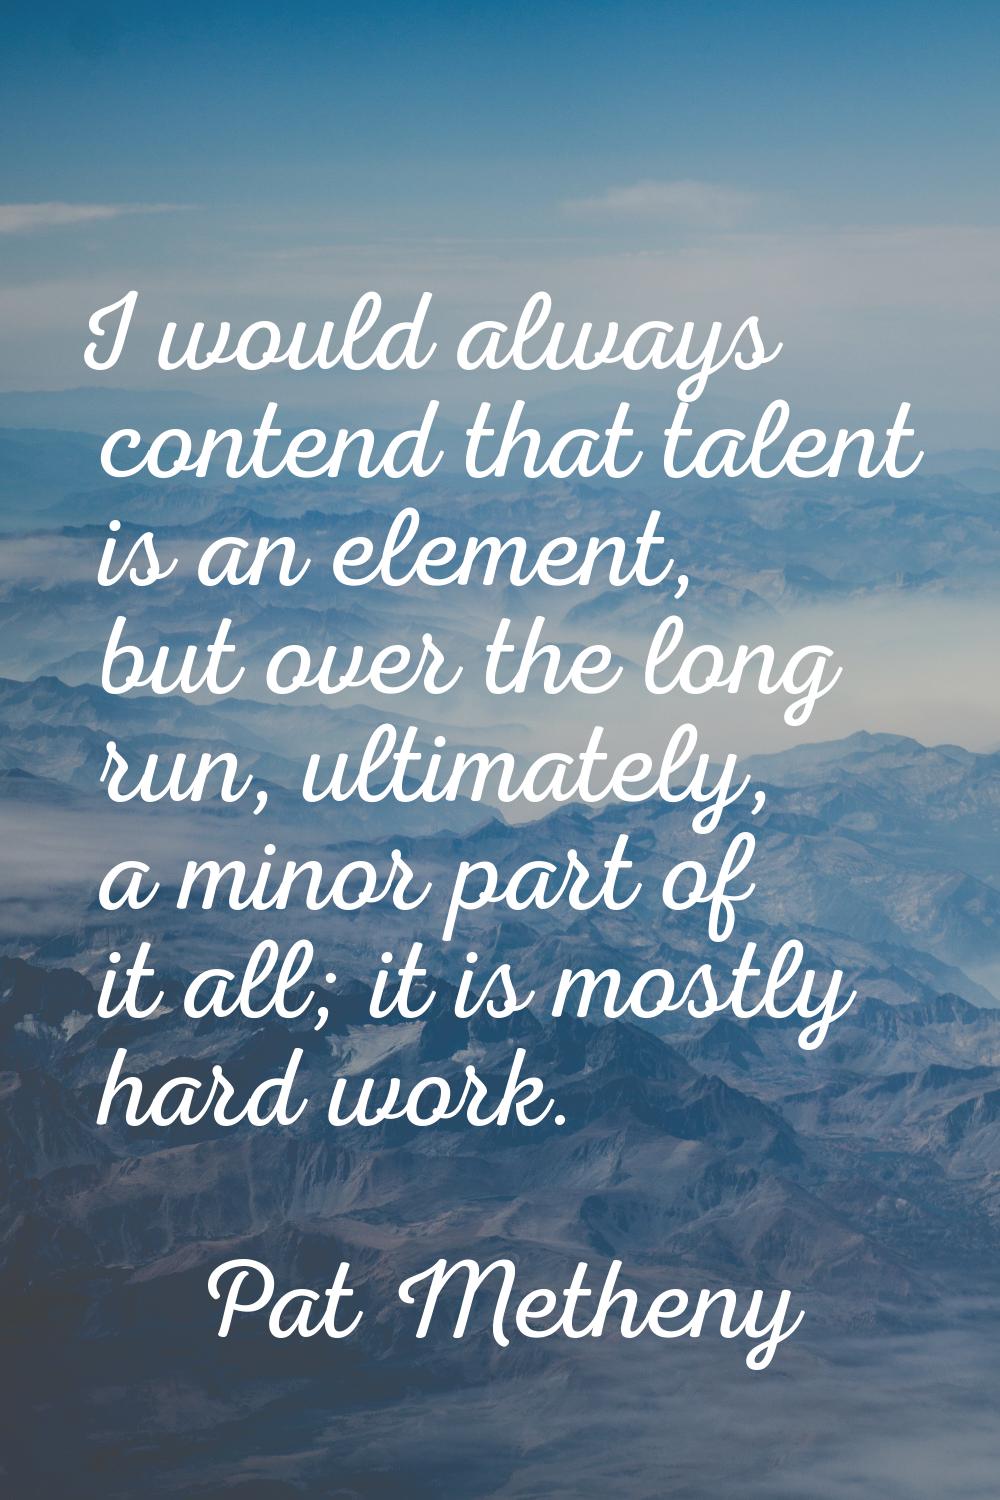 I would always contend that talent is an element, but over the long run, ultimately, a minor part o